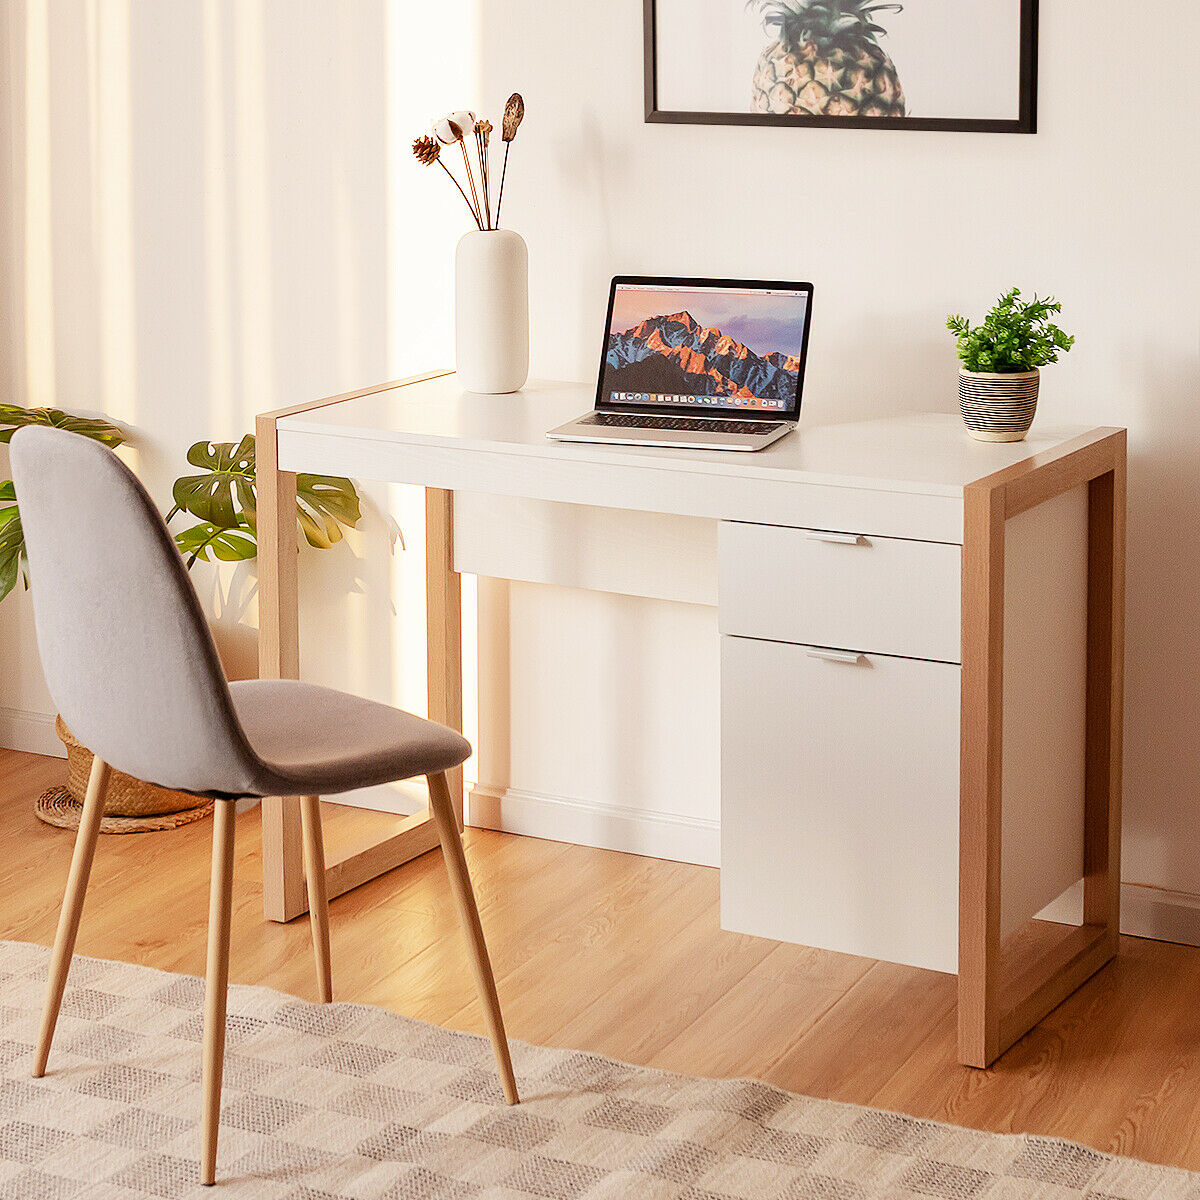 Wooden Computer Desk with Drawer and Cabinet for Home Office